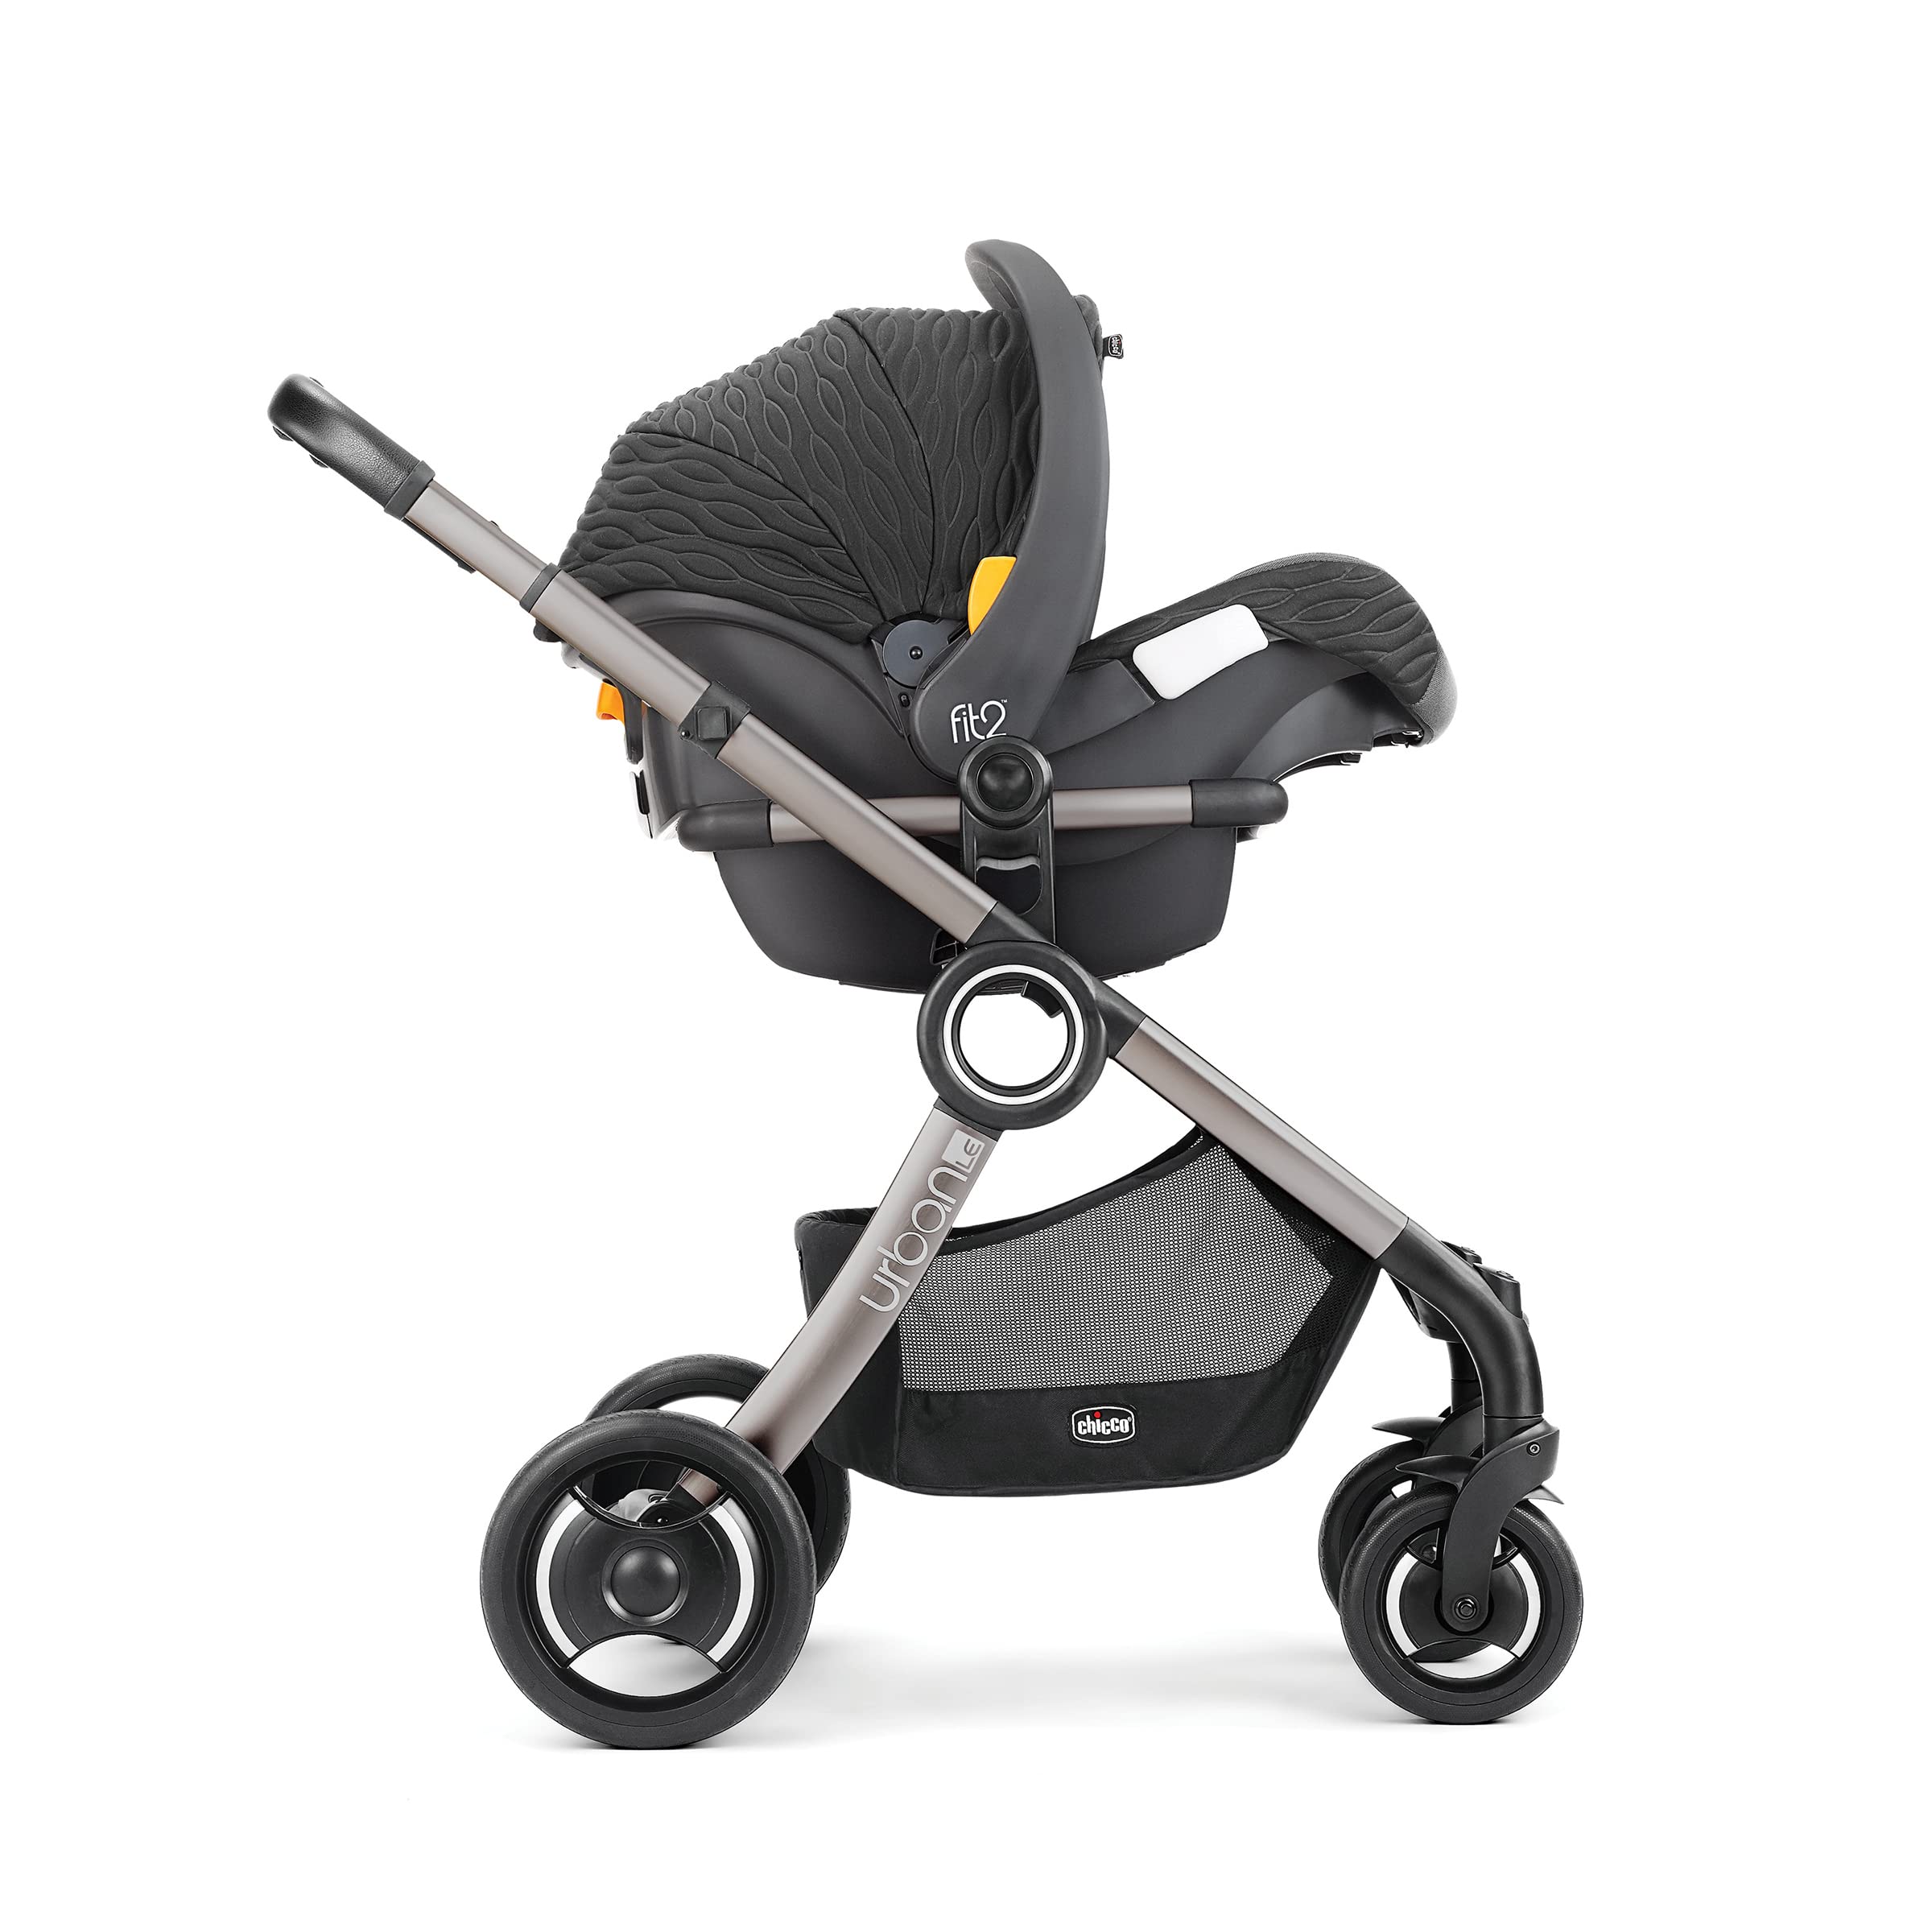 Chicco Fit2 Infant & Toddler Car Seat - Cienna